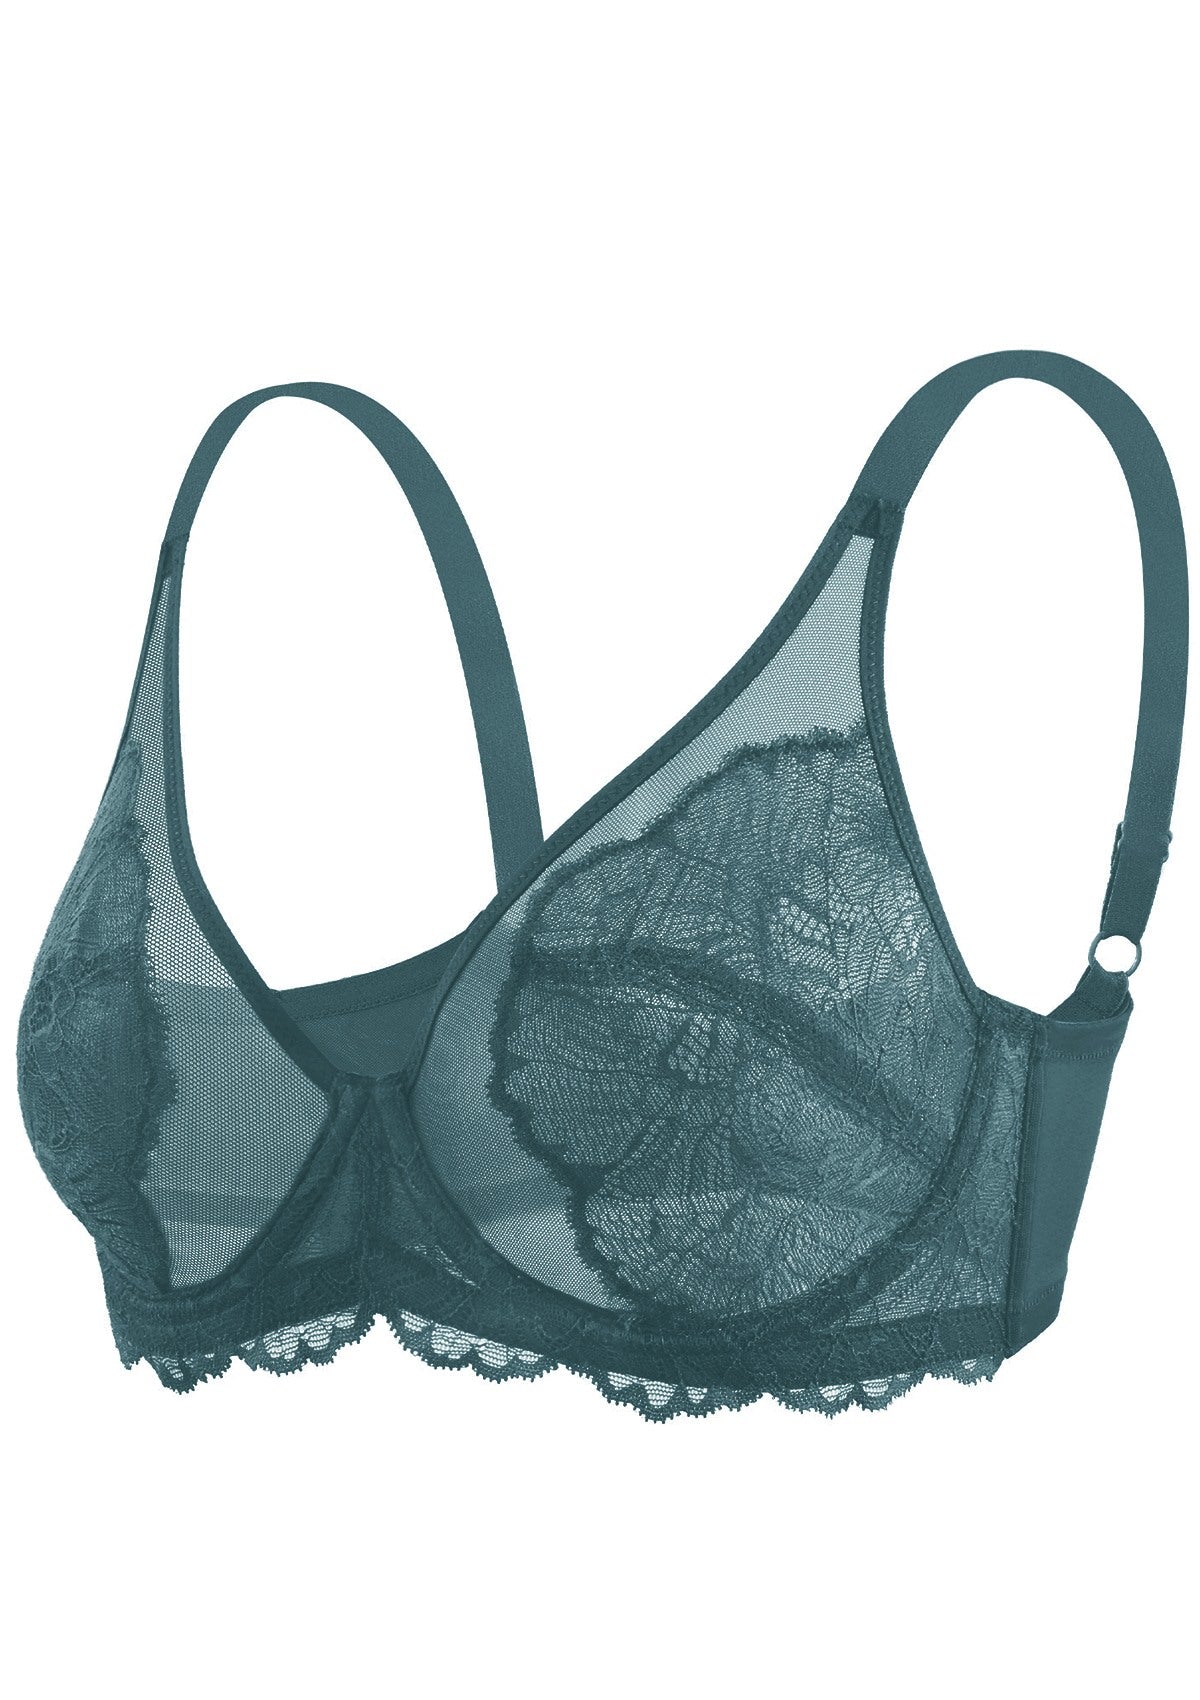 HSIA Blossom Full Figure See-Through Lace Bra For Side And Back Fat - Balsam Blue / 34 / C